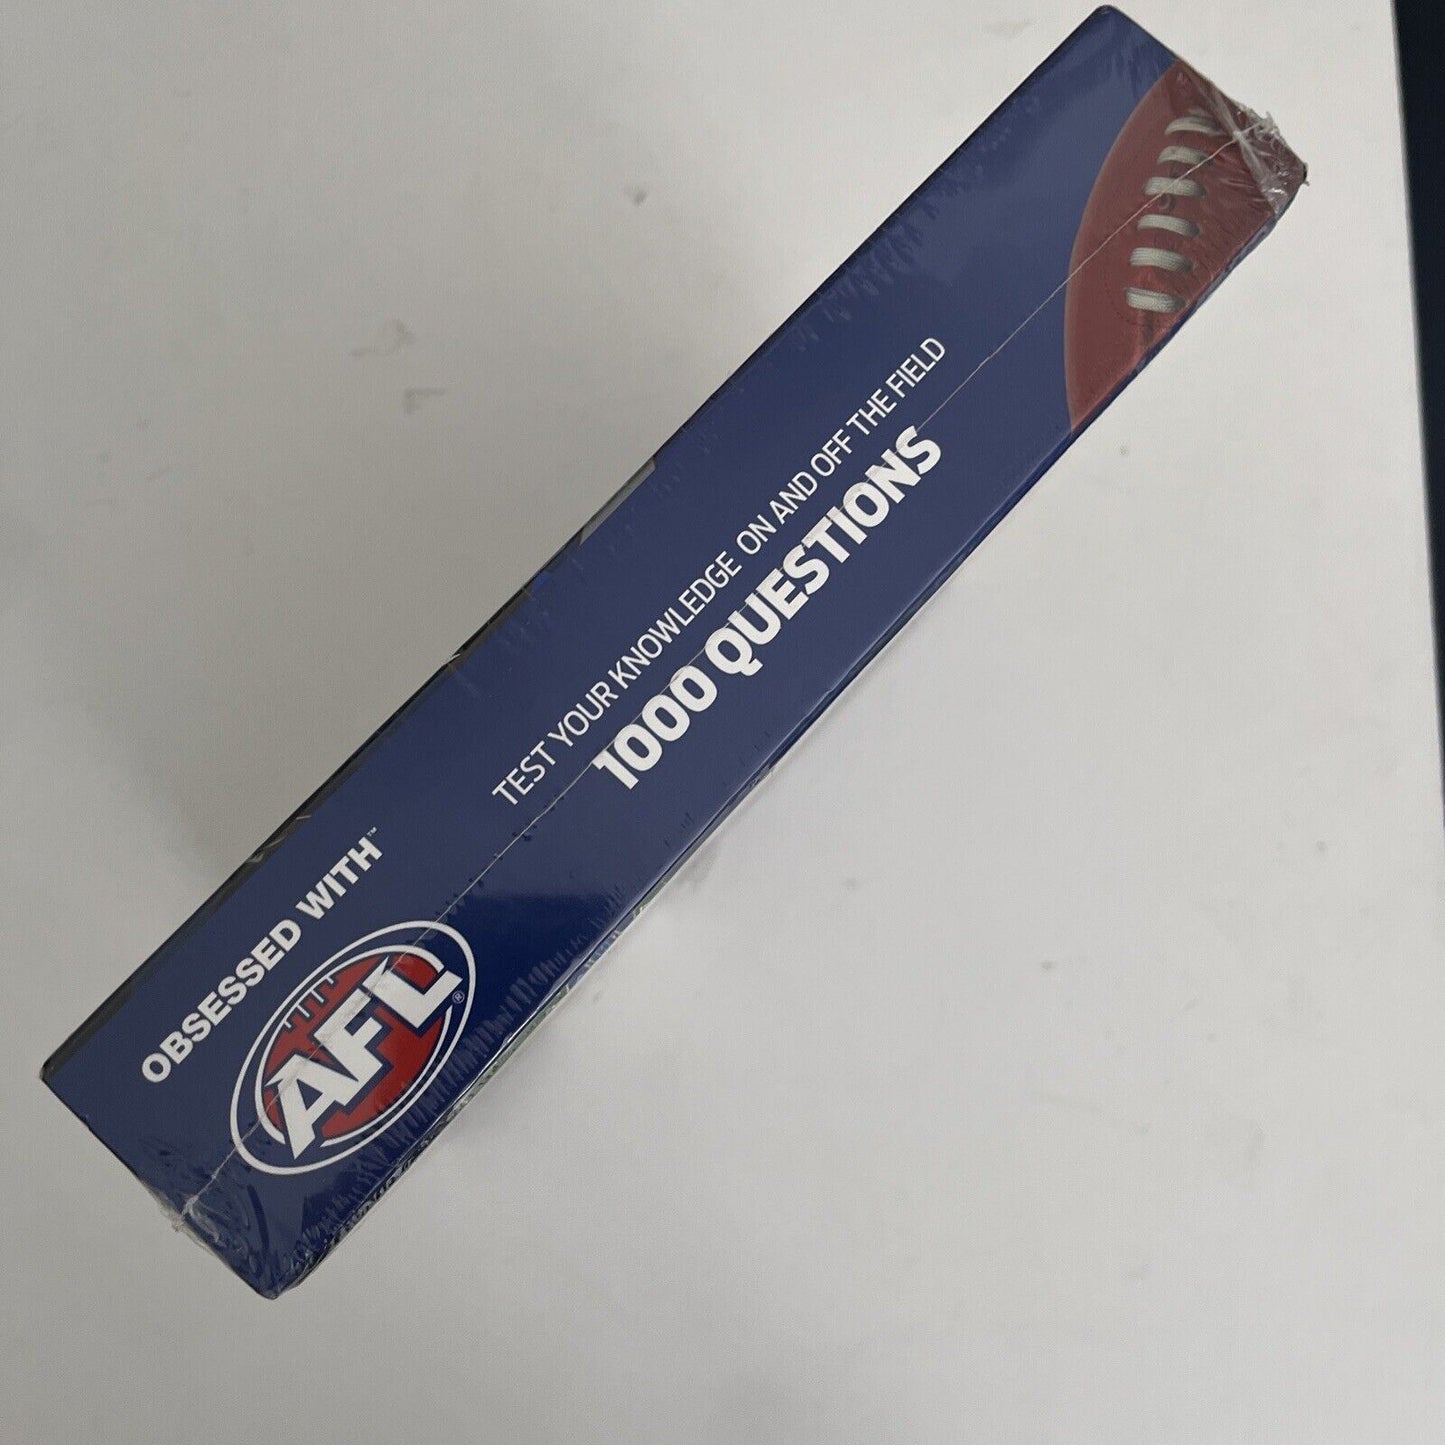 *New Sealed* Obsessed With AFL Board Game Aussie Football - Test Your Knowledge